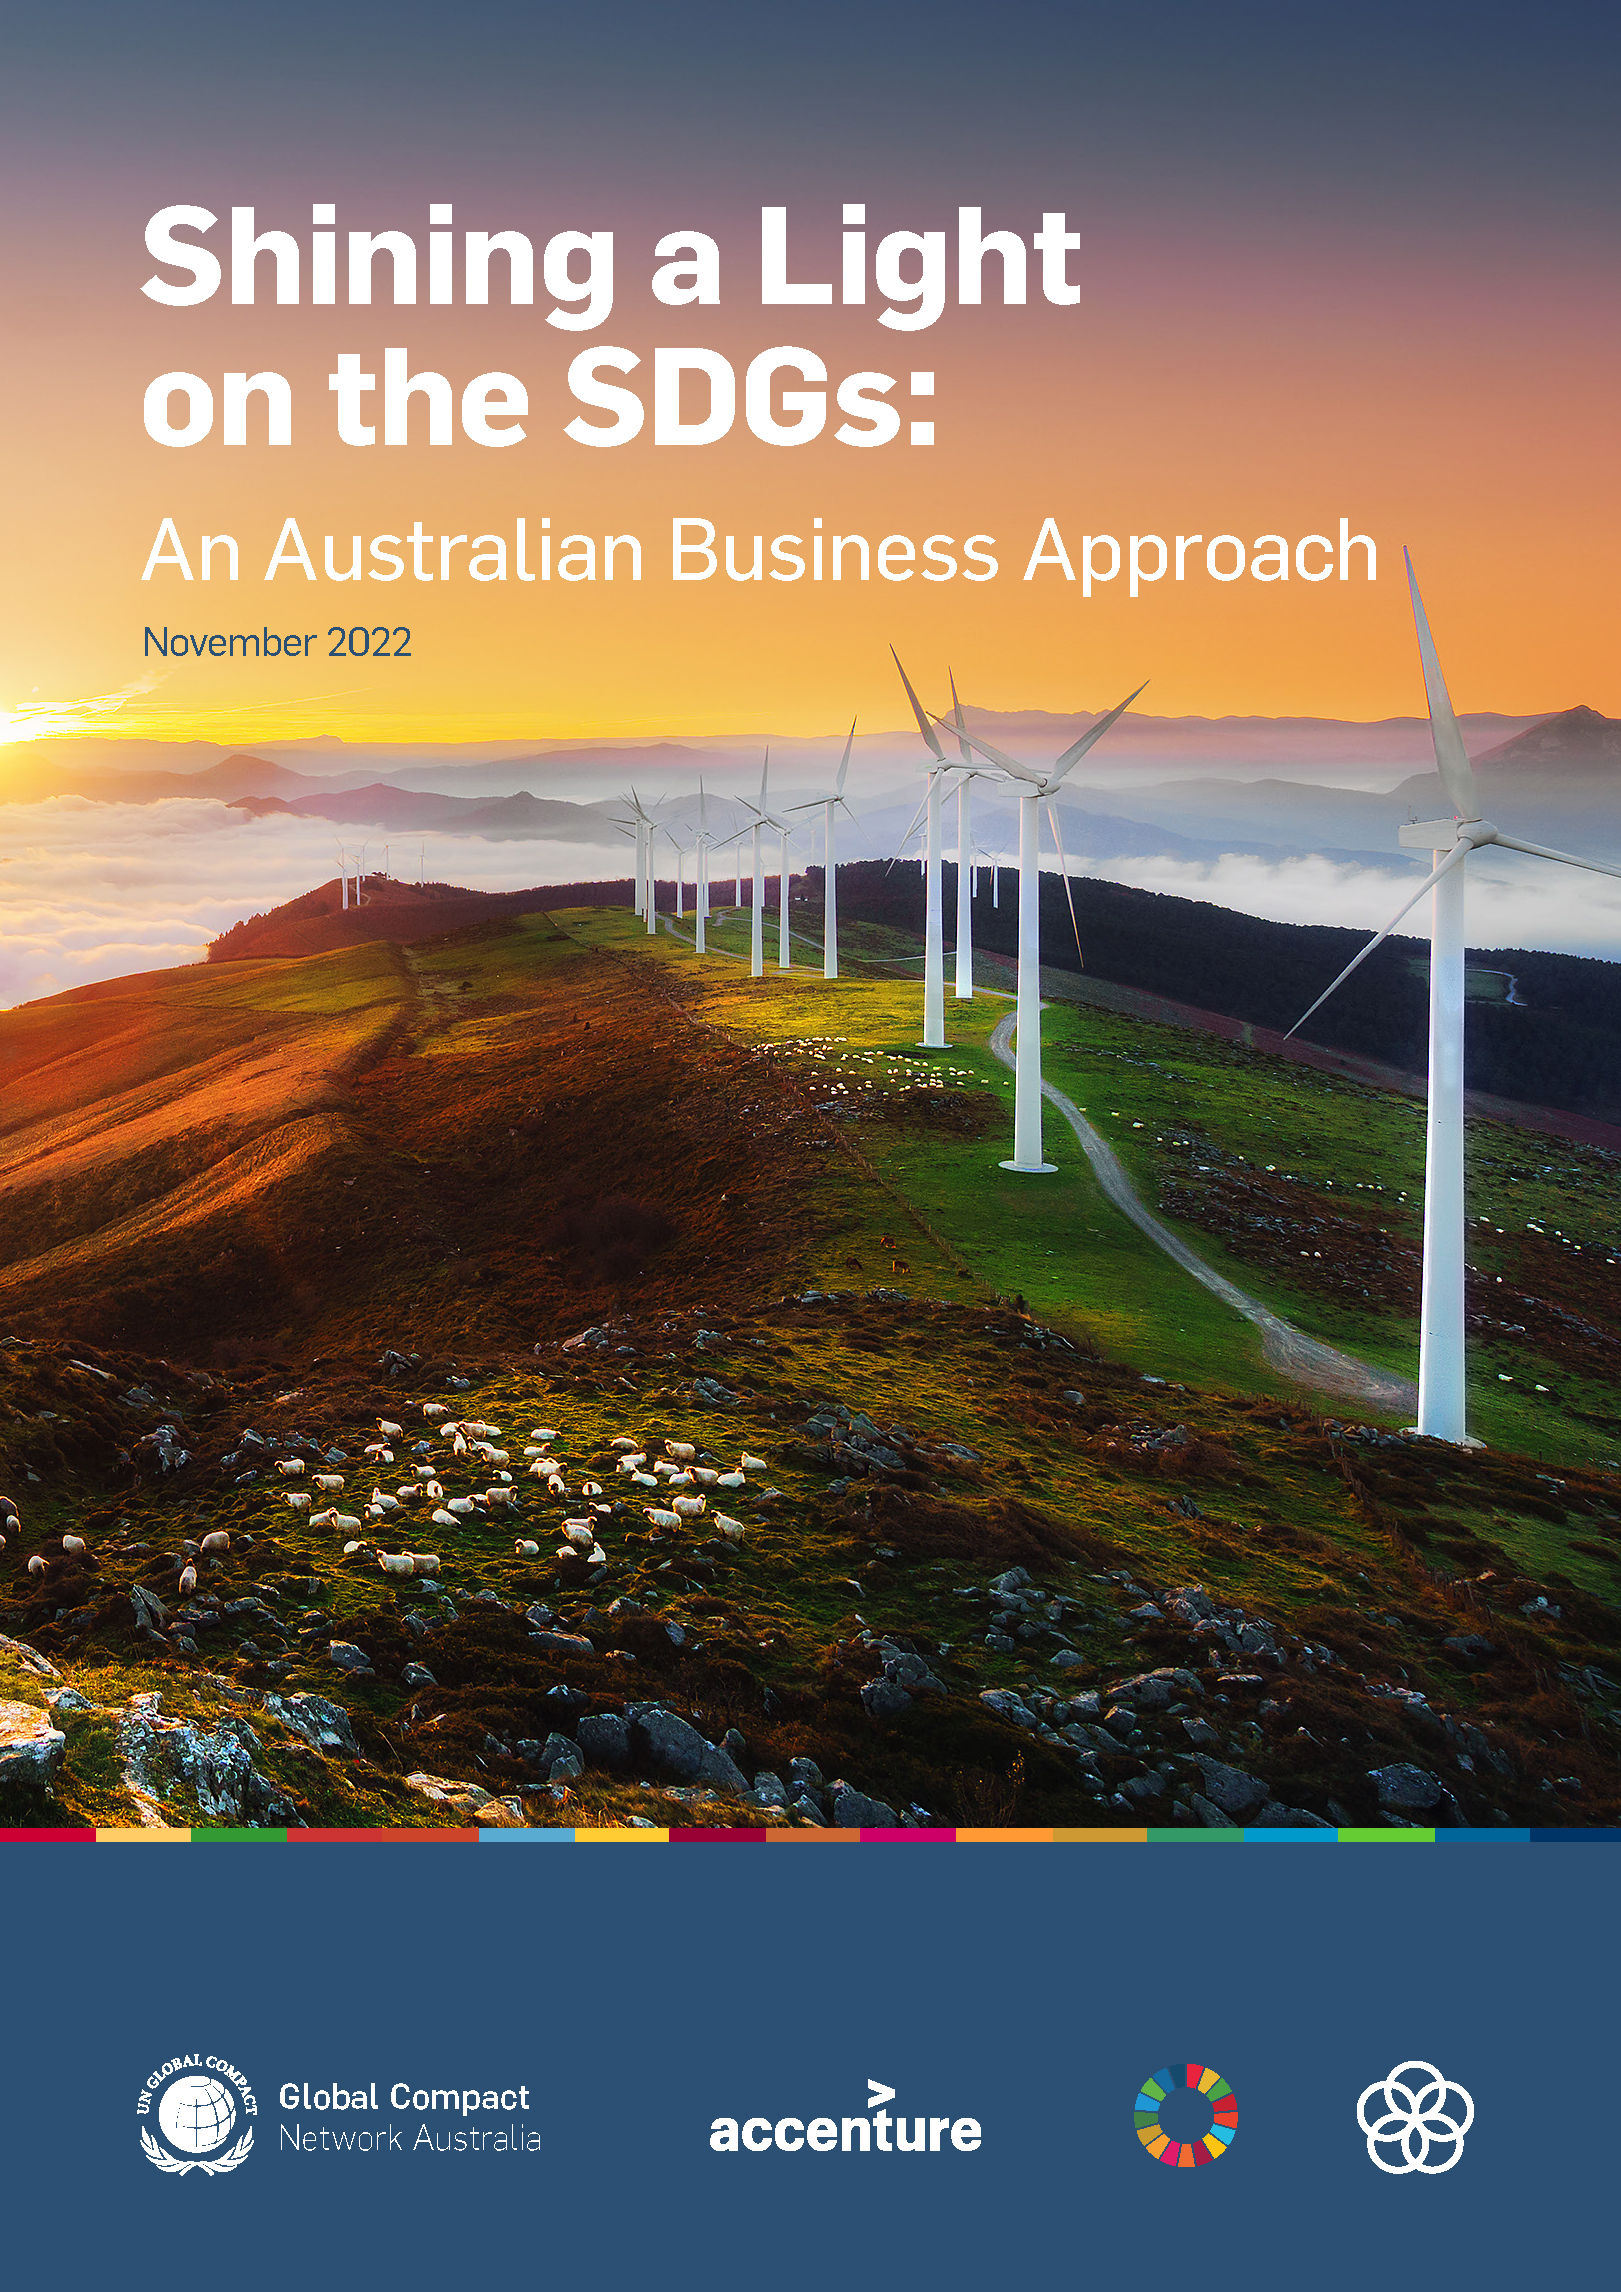 Front cover of the report. An aeria view of a wind farm. Title in white writing: Shining a Light on the SDGs: An Australian Business Approach